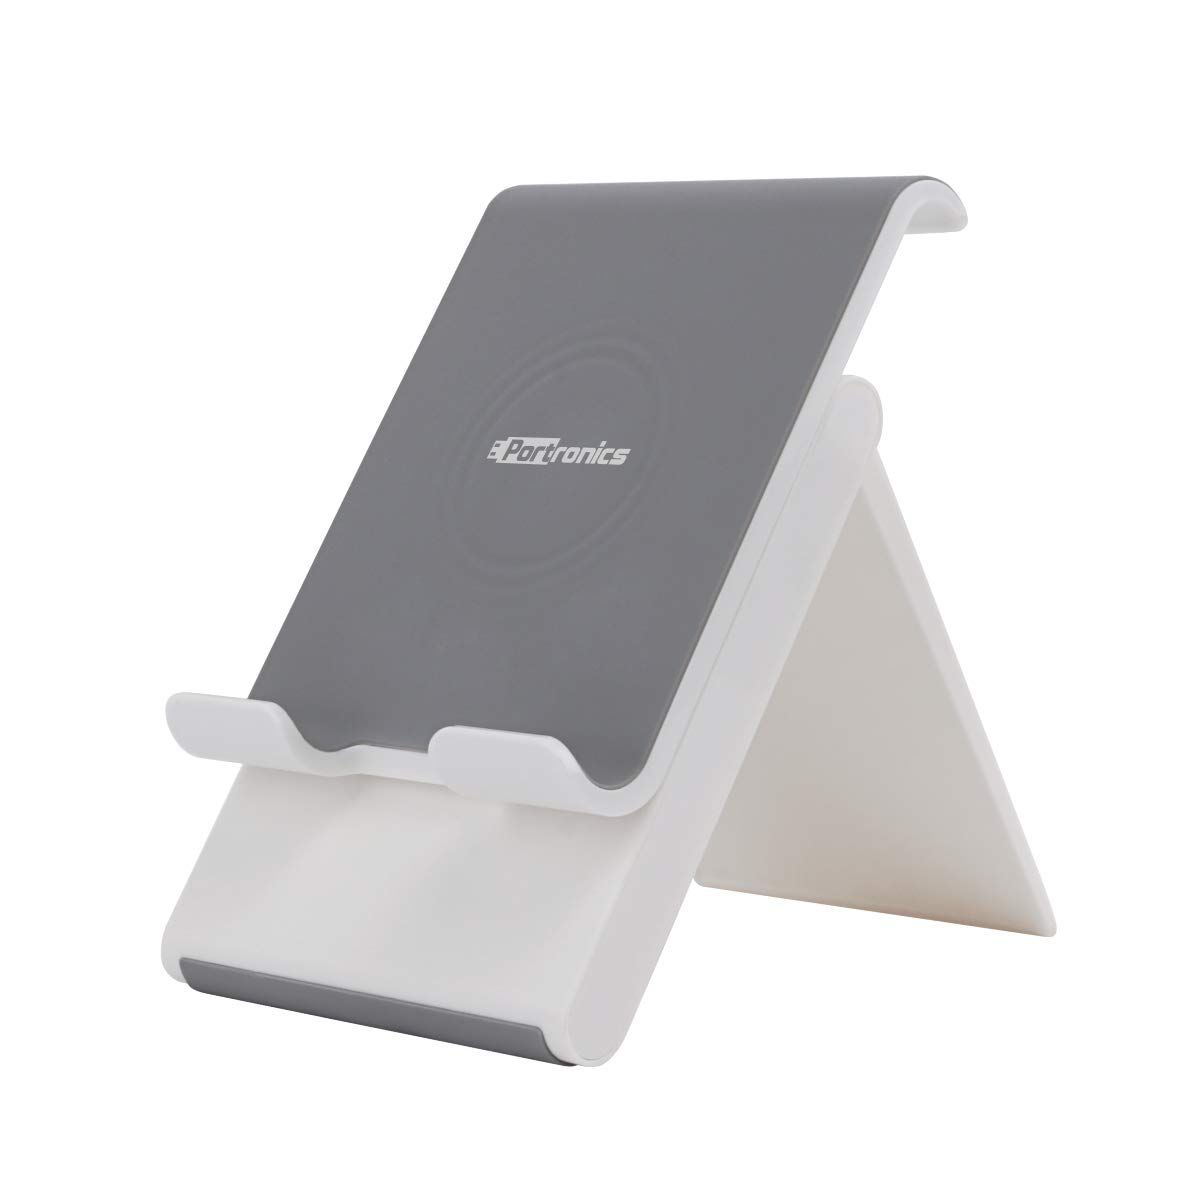 Portronics Paddie a Portable and Foldable Mobile & Tablet Holder (White)